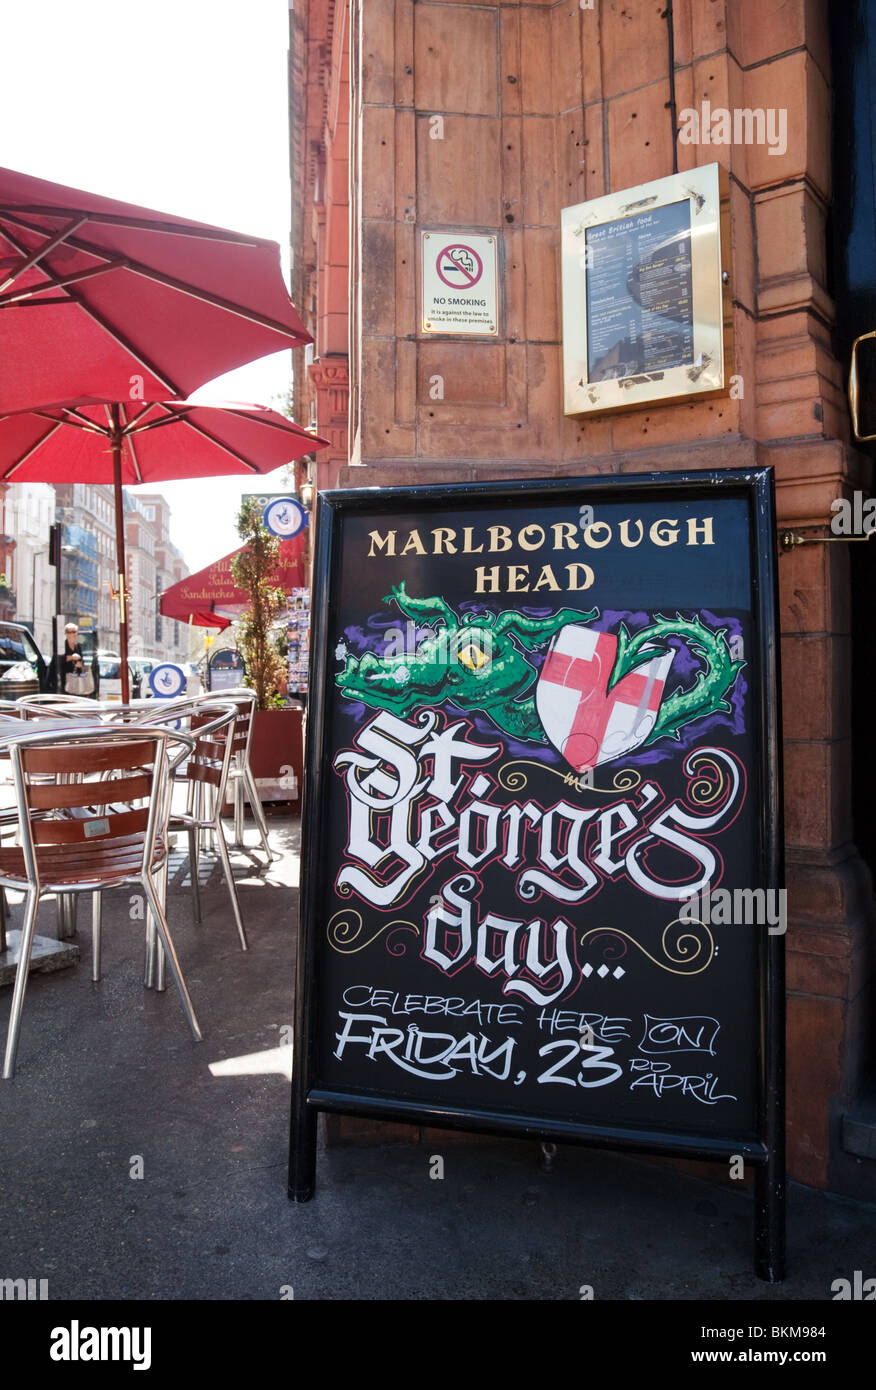 St Georges Day pub sign at the Marlborough Head Pub, Mayfair, Central London, UK Stock Photo